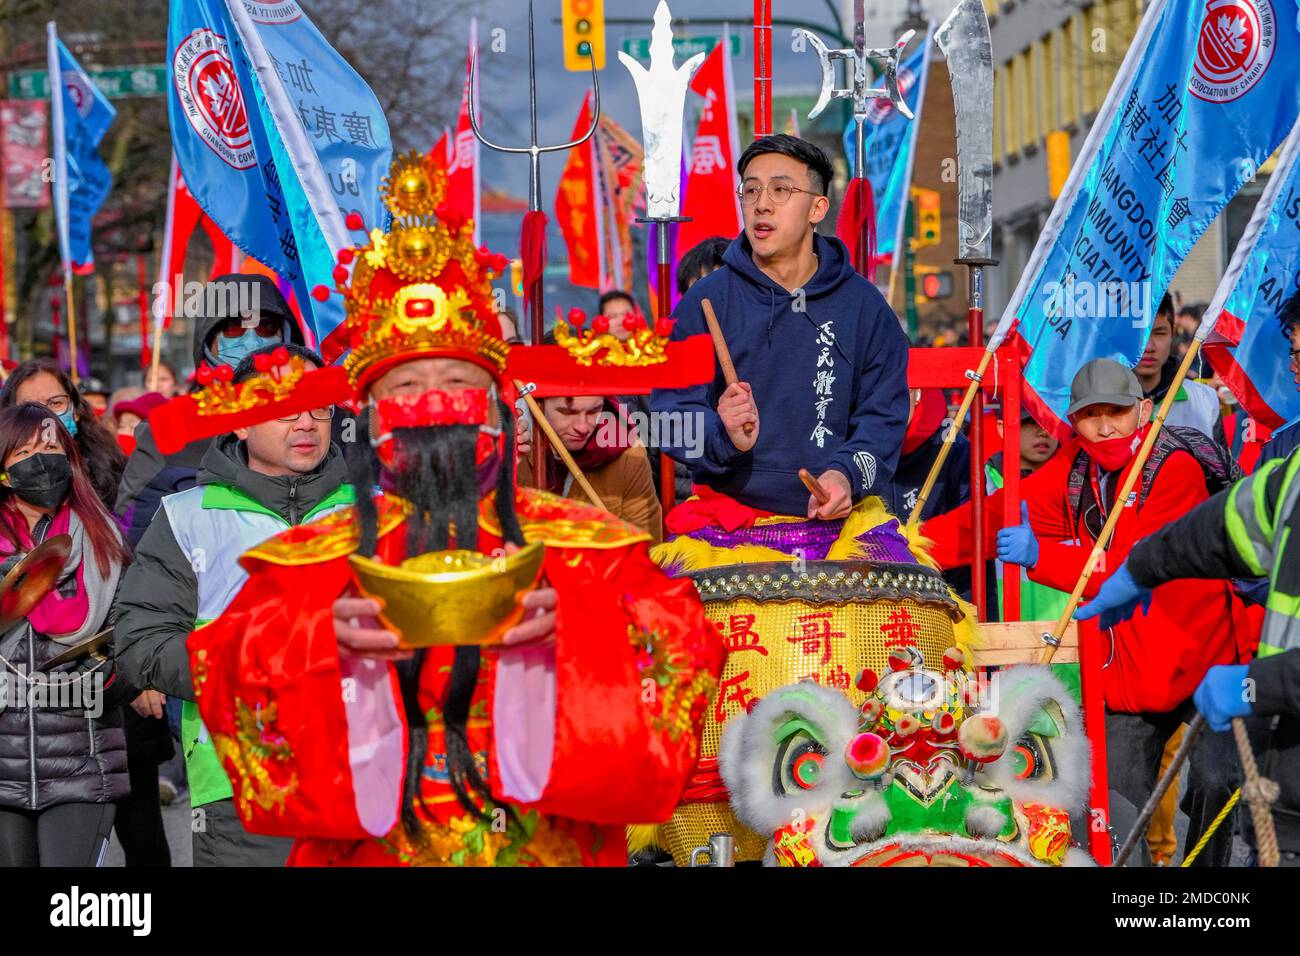 Drummer, Chinese Lunar New Year Parade, Chinatown, Vancouver, British Columbia, Canada Stock Photo